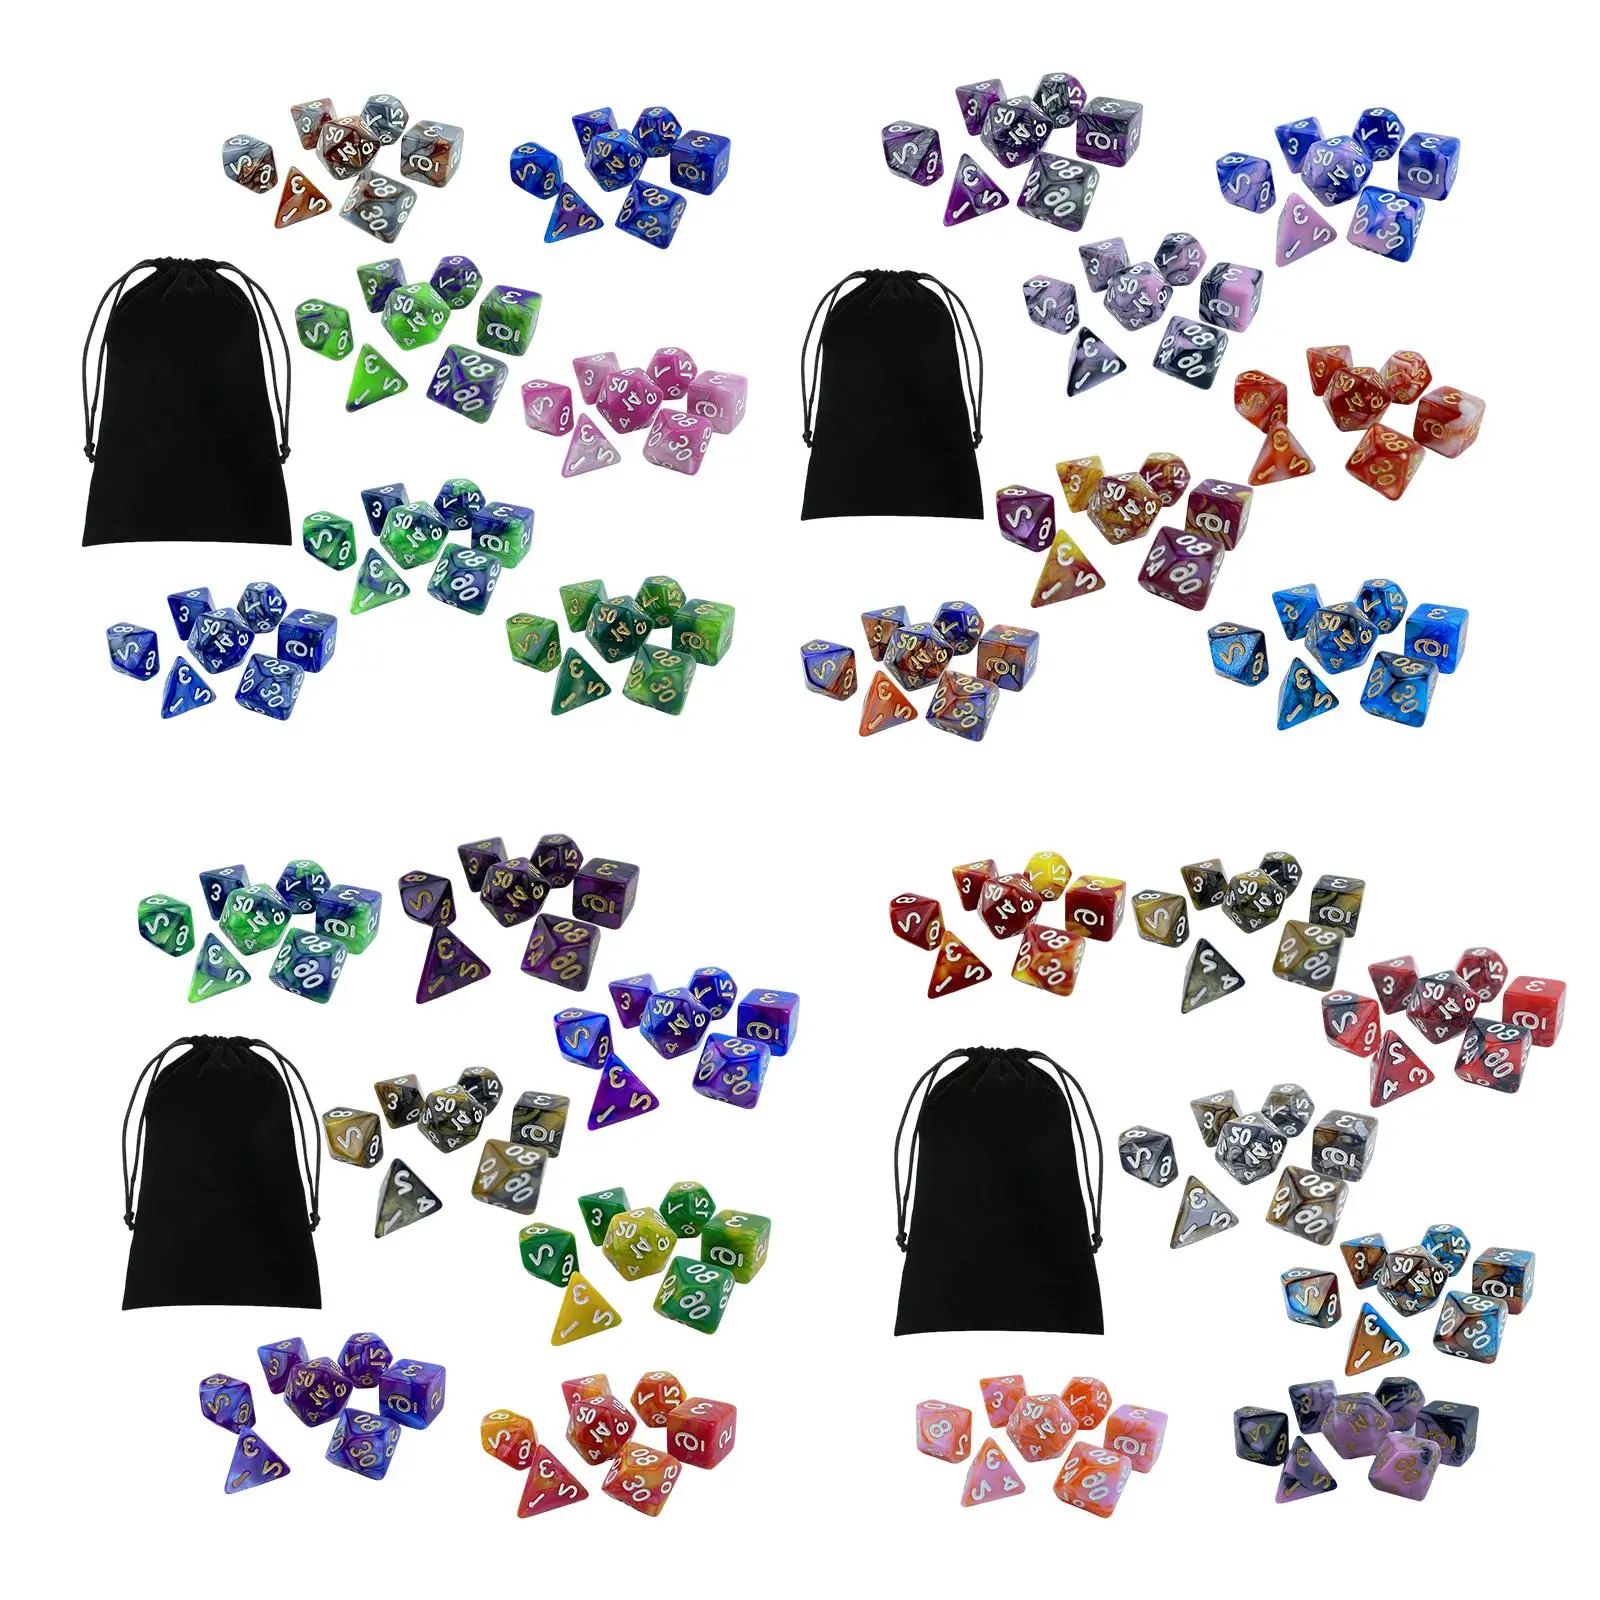 49 Pieces Engraved Polyhedral Dices Set for Roll Playing Games KTV Parties